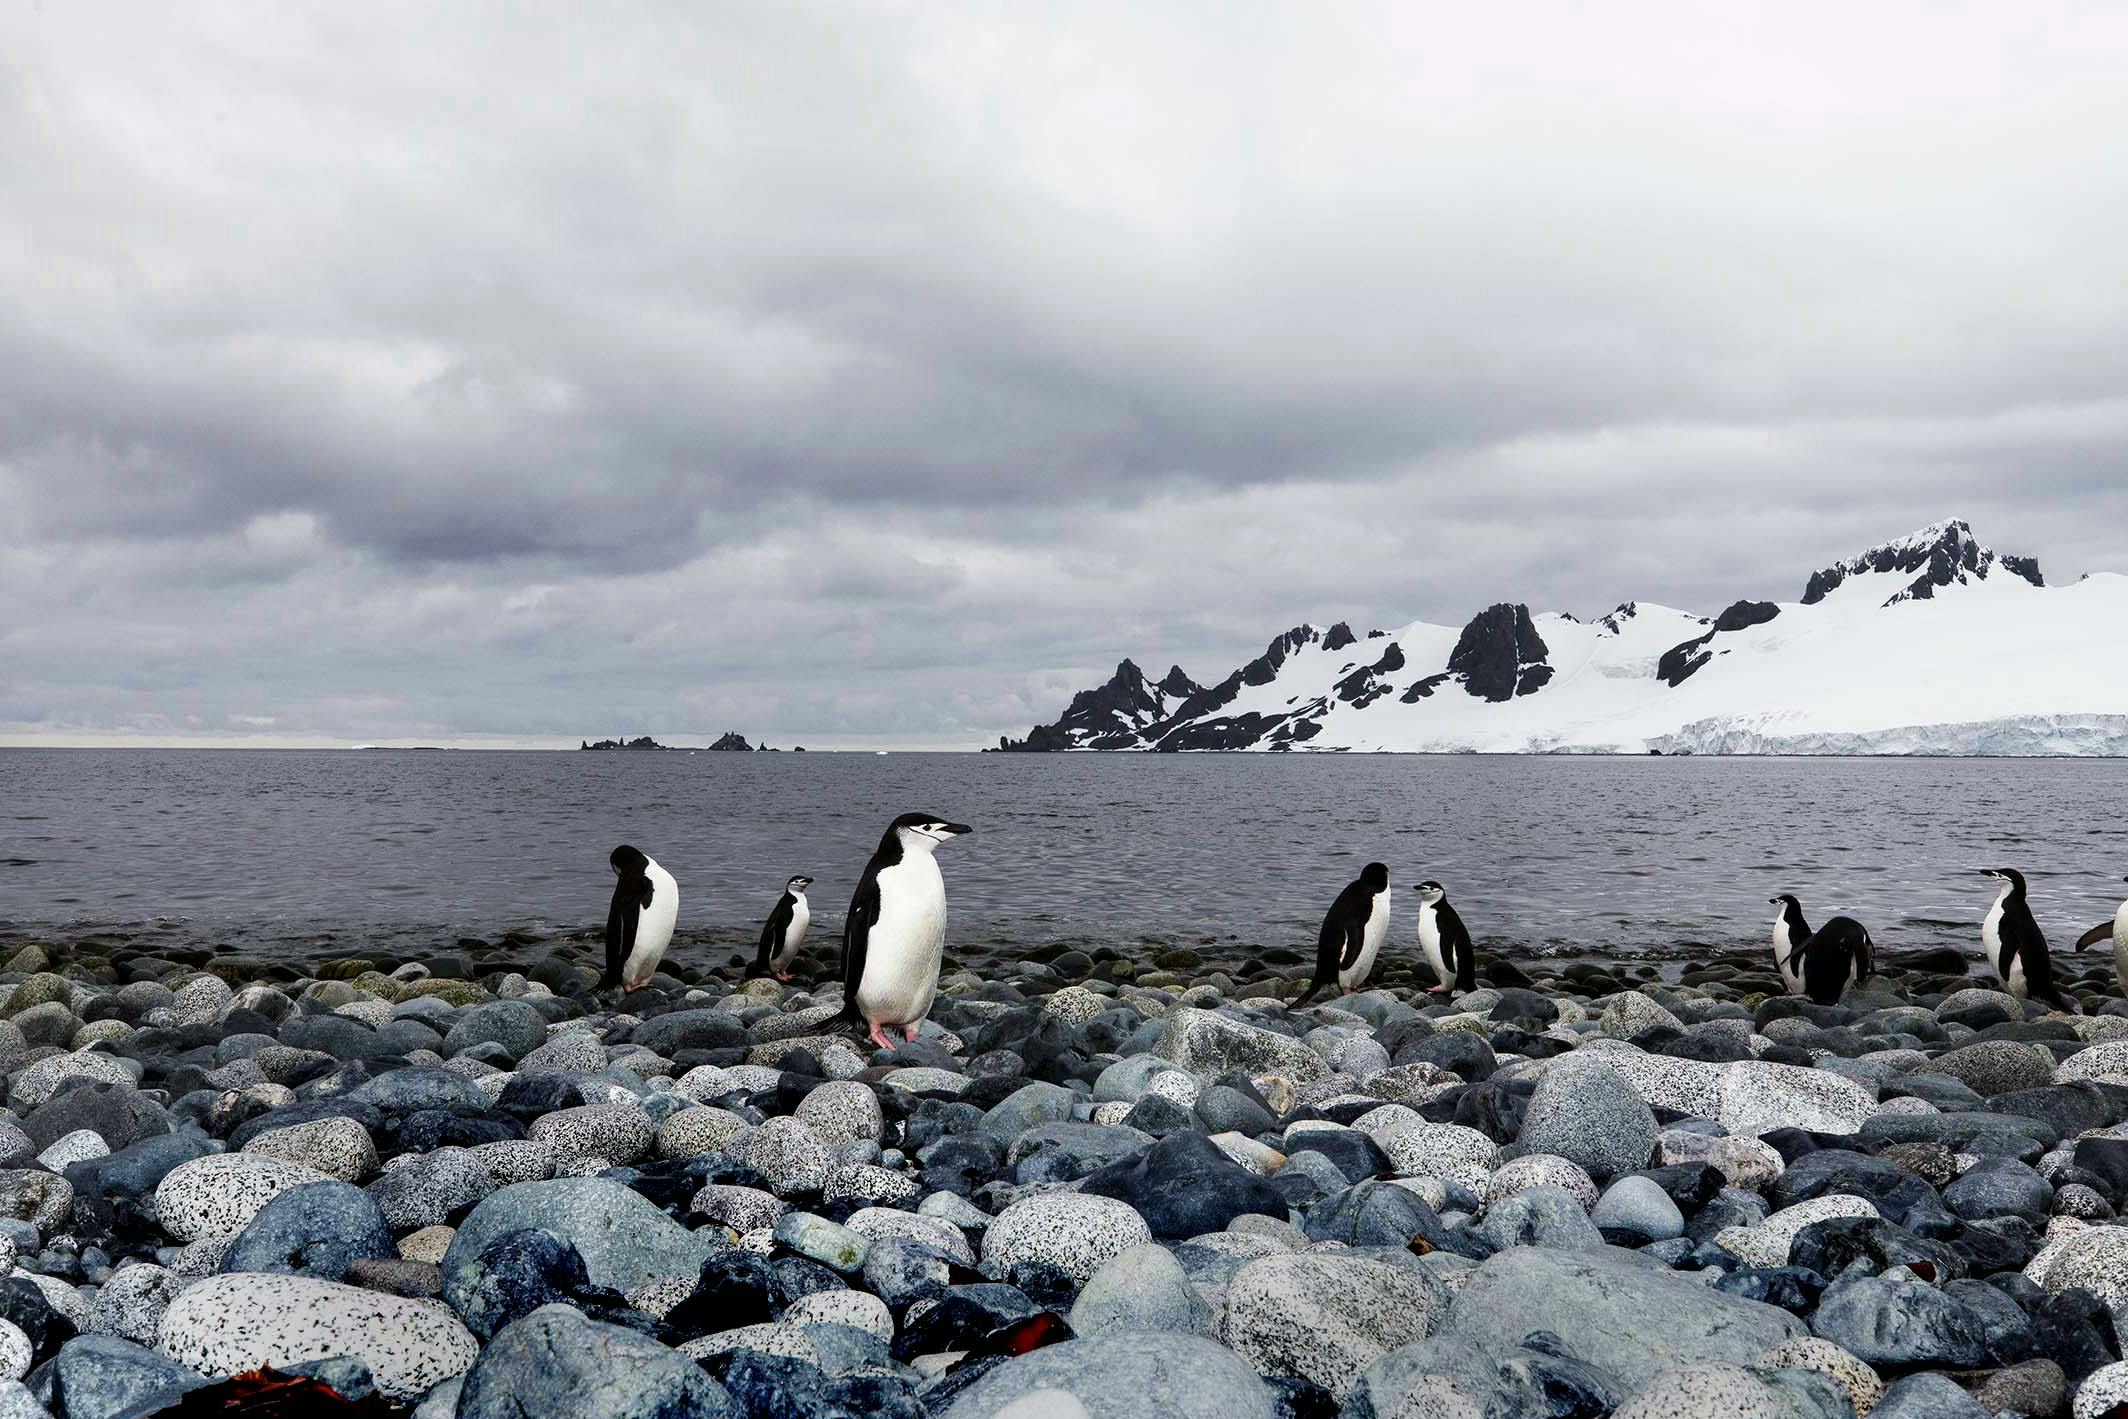 Penguins are perhaps the most popular subject in Antarctica photography.